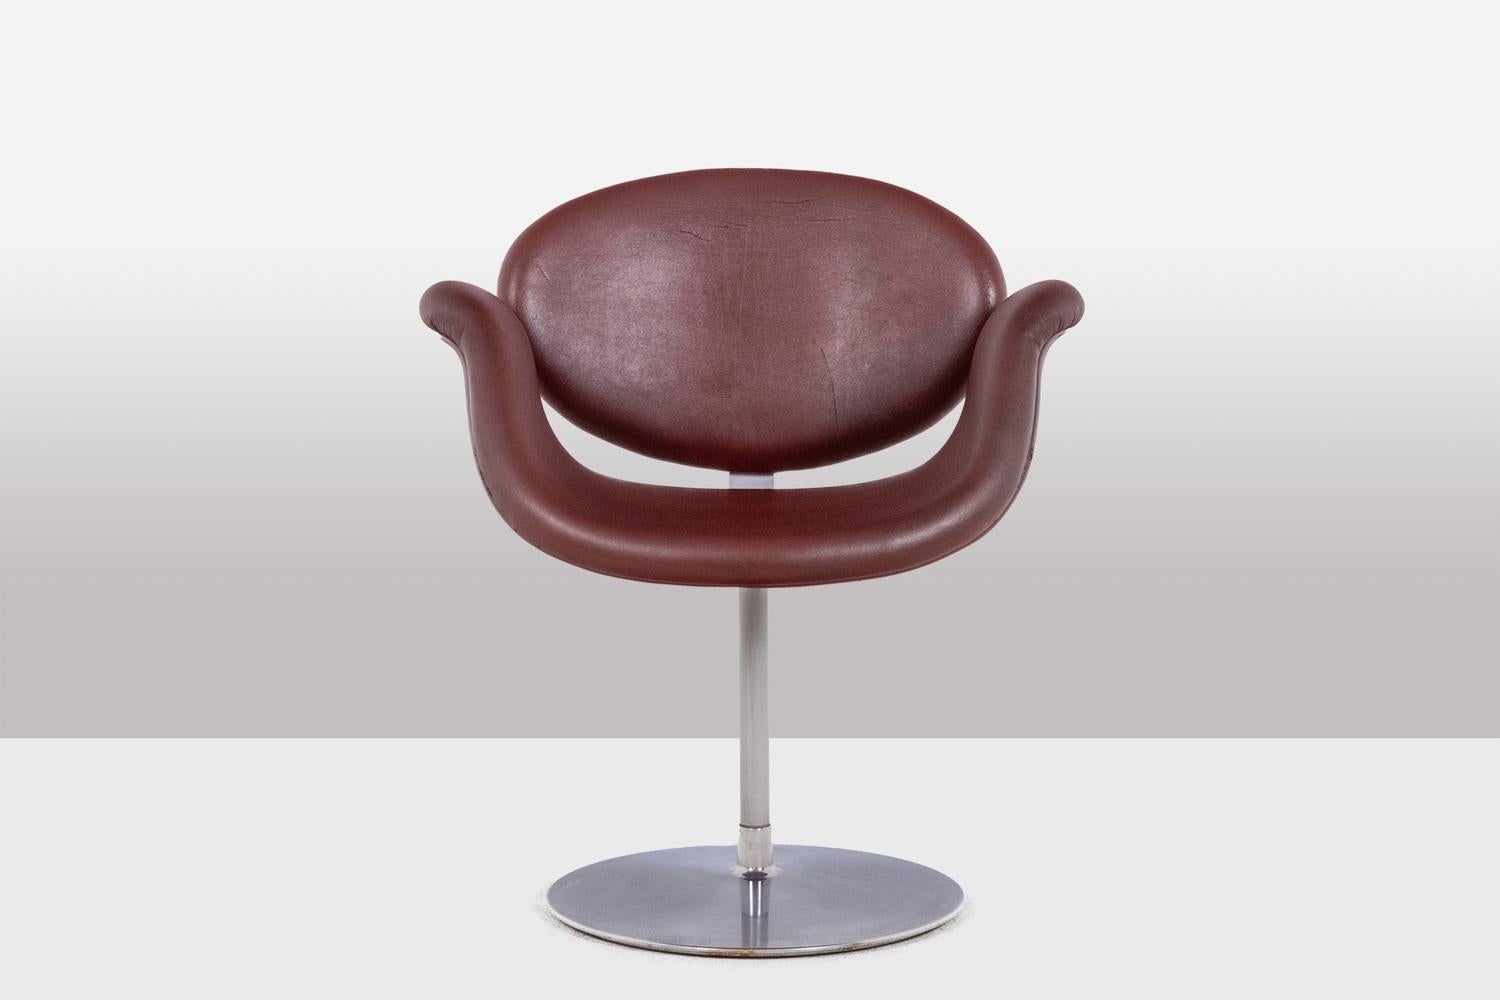 Pierre Paulin for Artifort.

“Tulipe” model armchair, swivel and burgundy color. Seat resting on a round chromed metal base.

French work realized in the 1980s.

Dimensions: H 77 x D 45 cm

Reference:LS5666411A